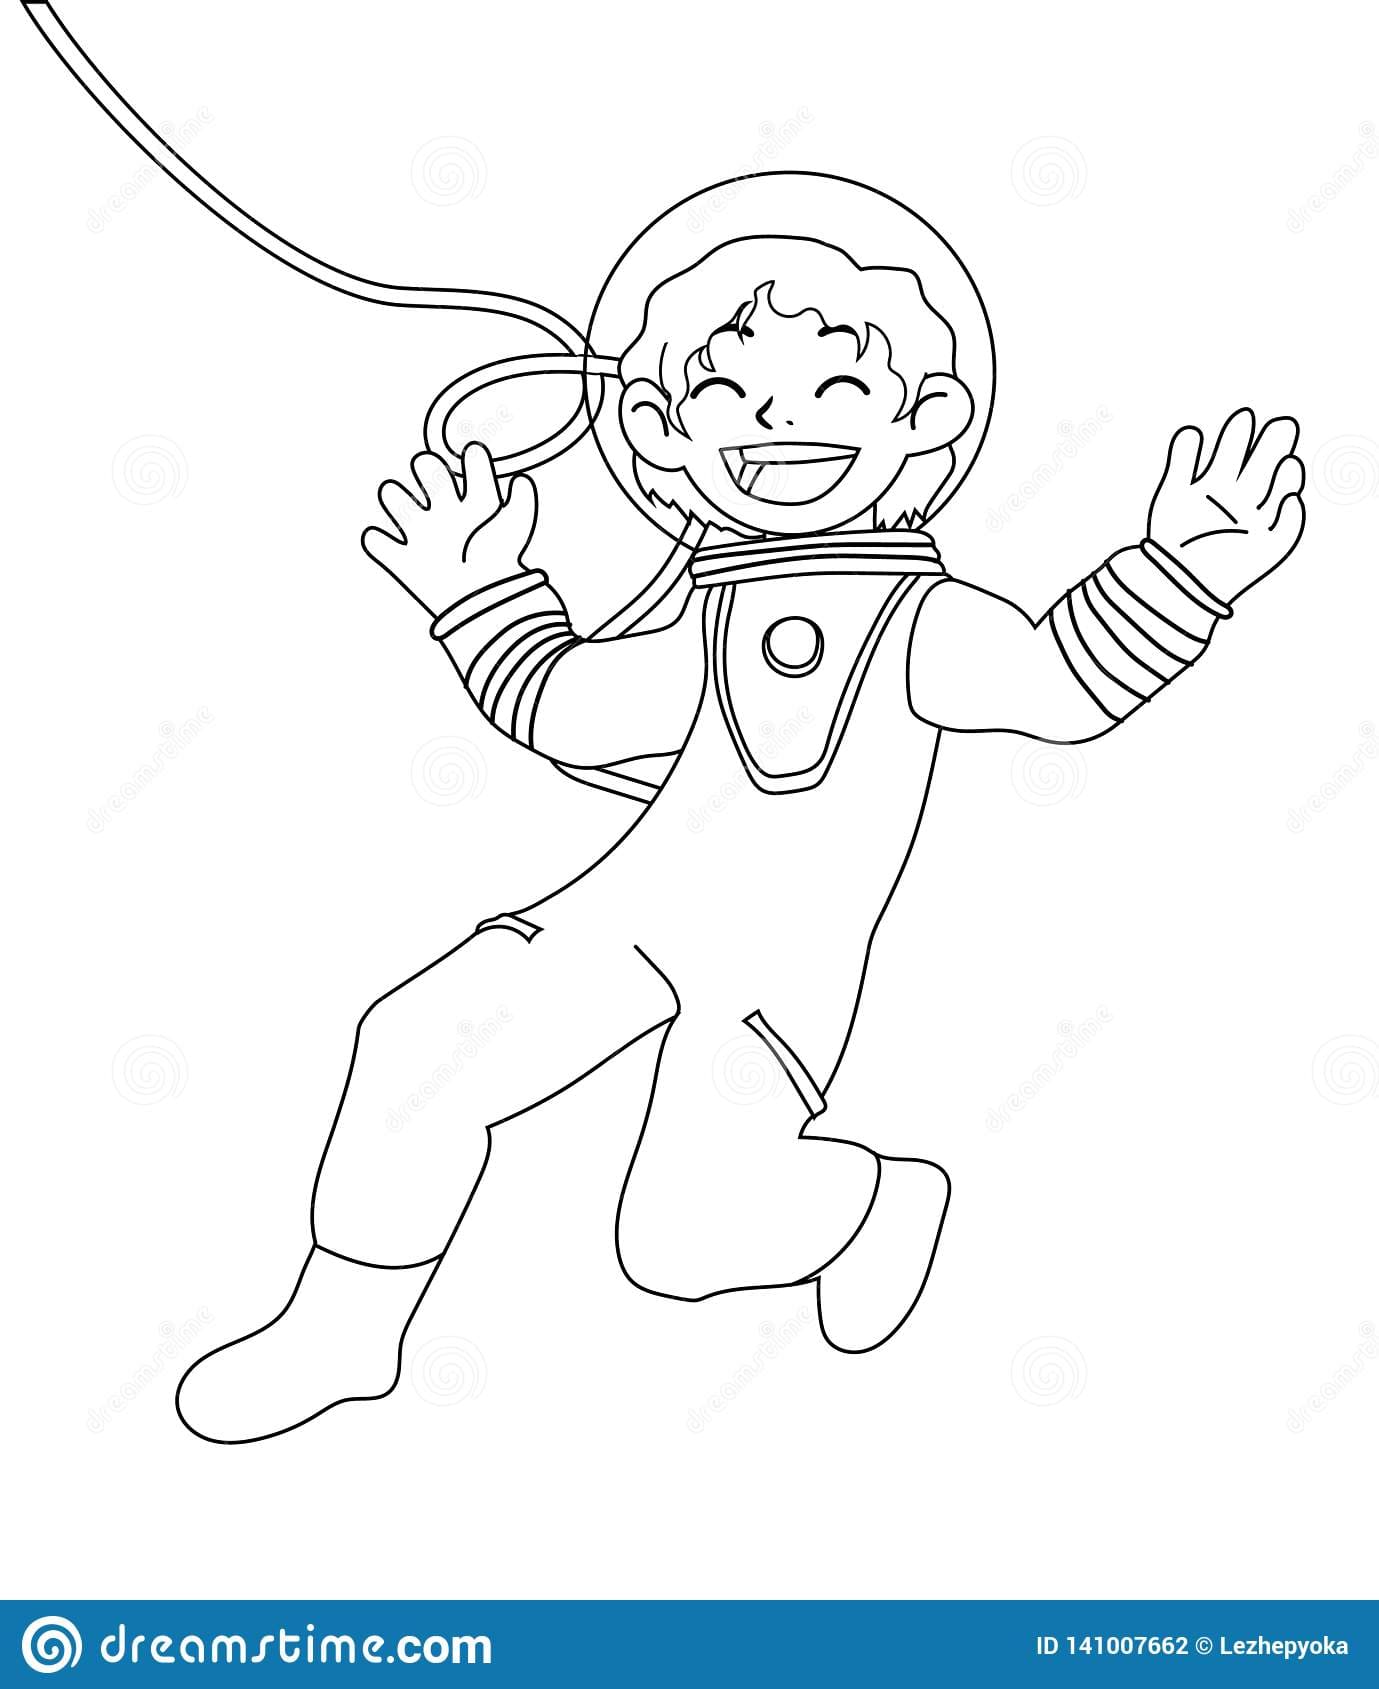 Children illustration with a happy girl astronaut